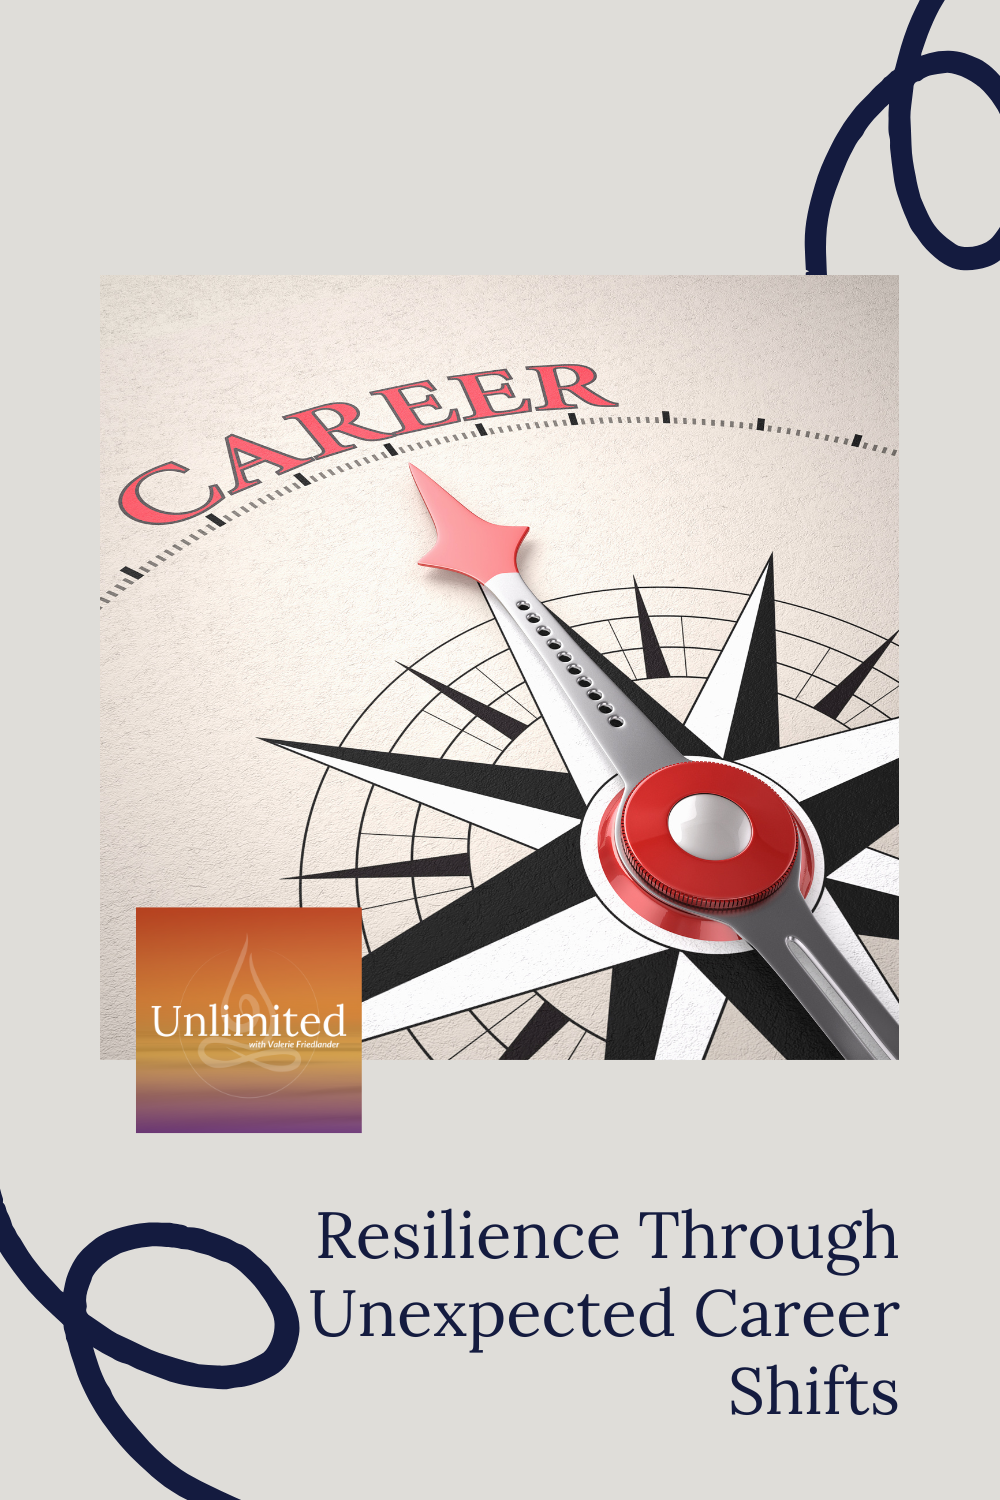 Resilience Through Unexpected Career Shifts Pinterest Image